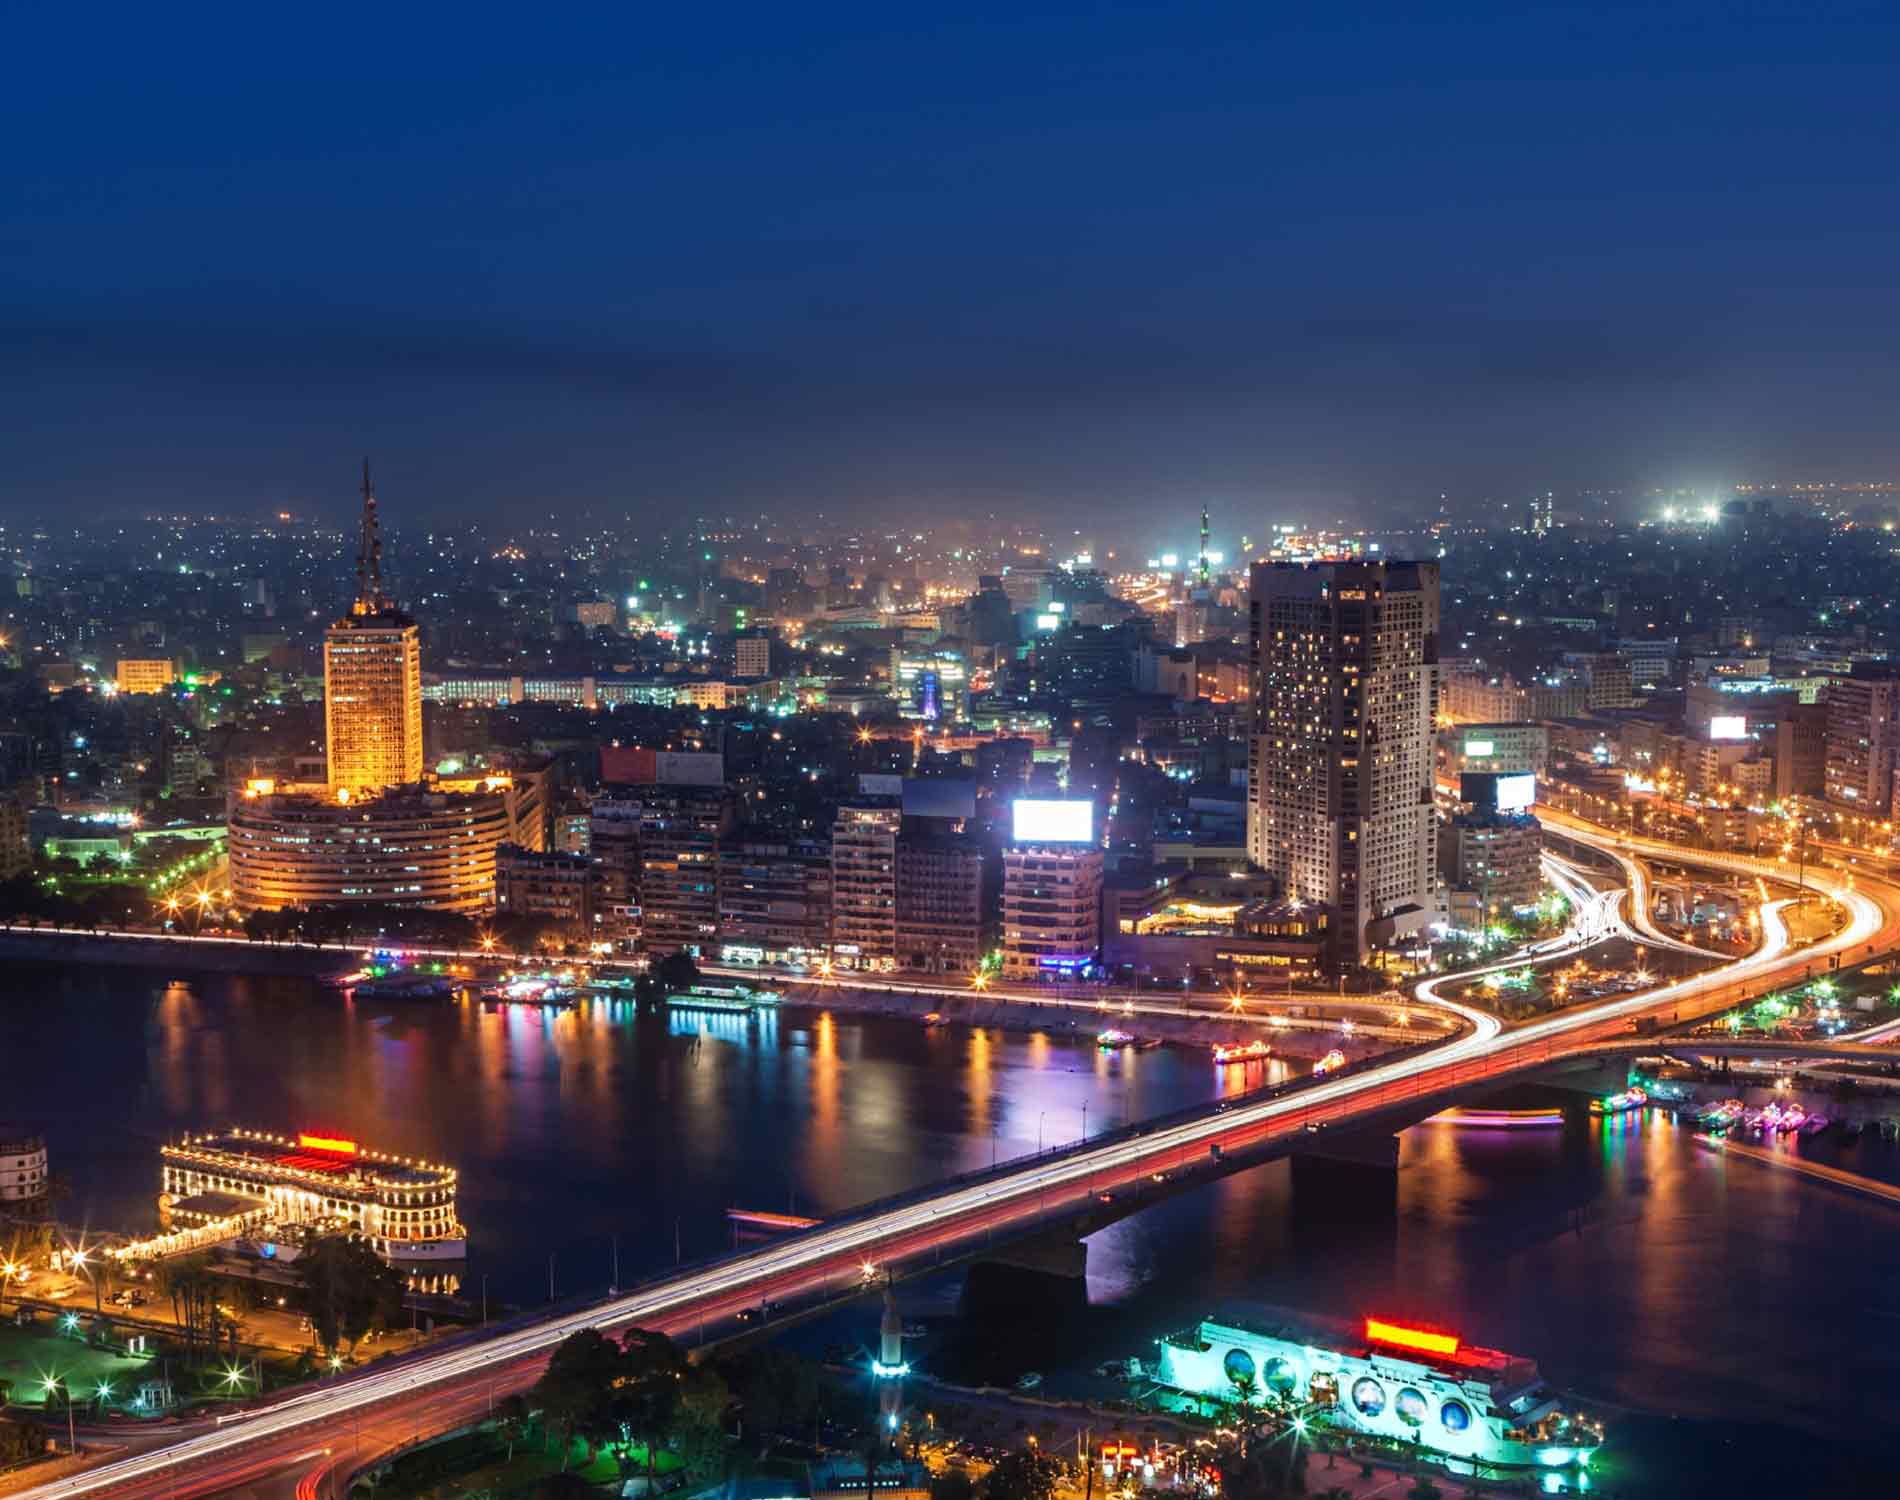 /-/media/images/website/background-images/offices/cairo/cairo.ashx